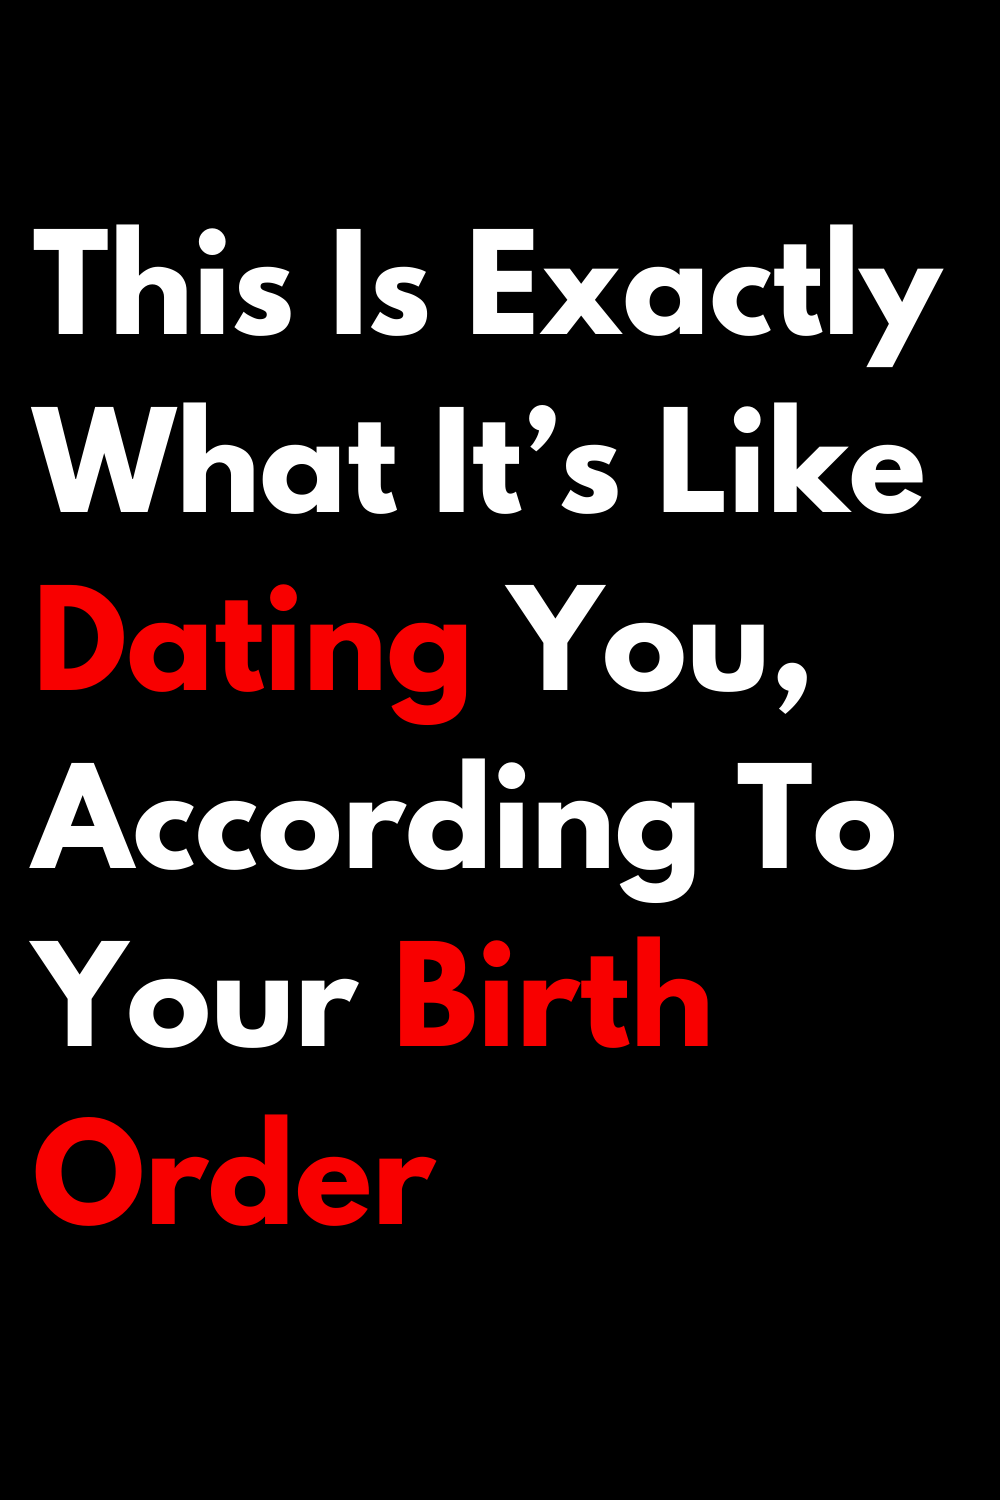 This Is Exactly What It’s Like Dating You, Based On Your Birth Order